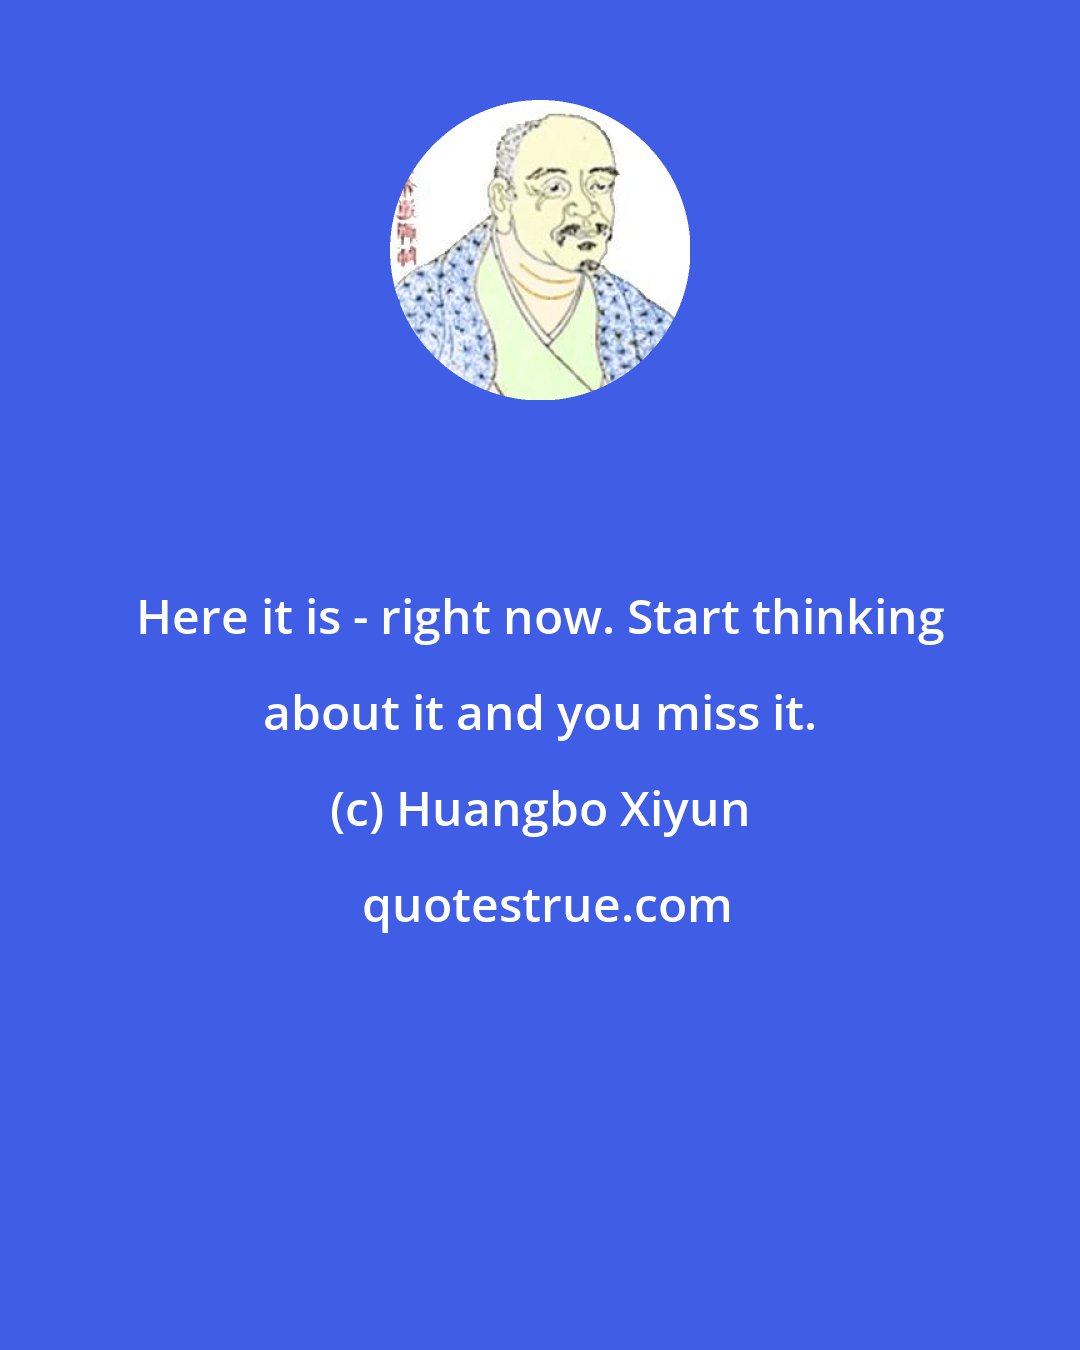 Huangbo Xiyun: Here it is - right now. Start thinking about it and you miss it.